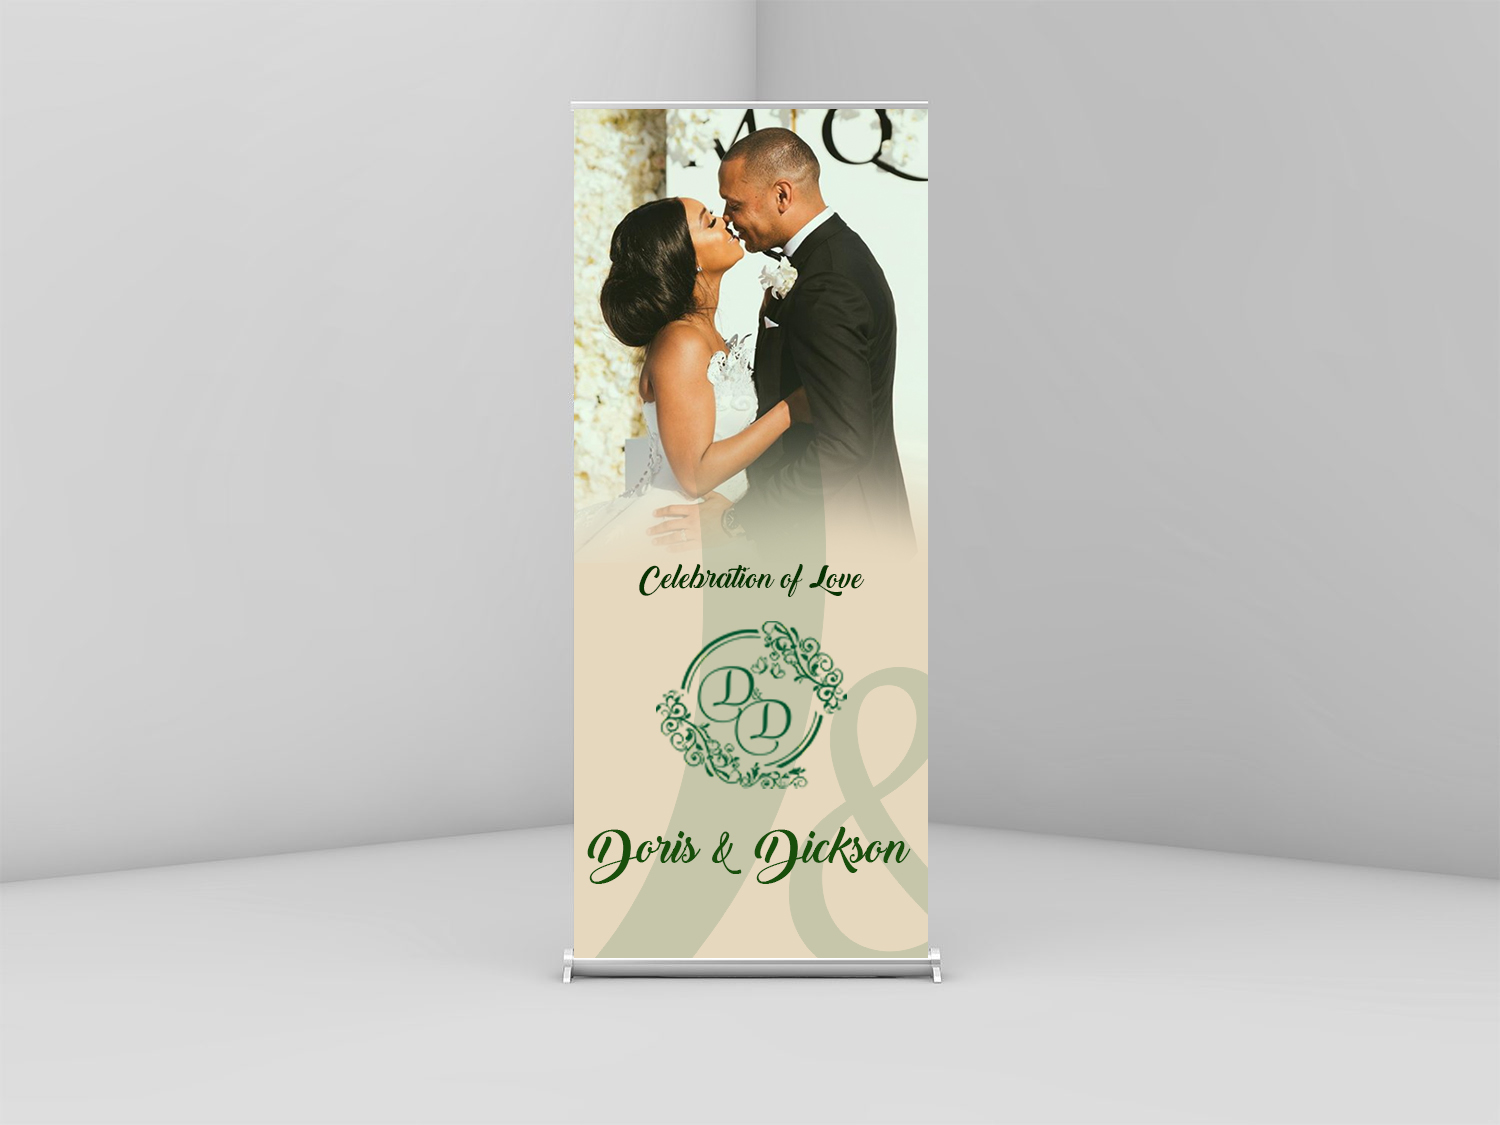 Roll Up Banners And Stand (Big Base) Design and Print